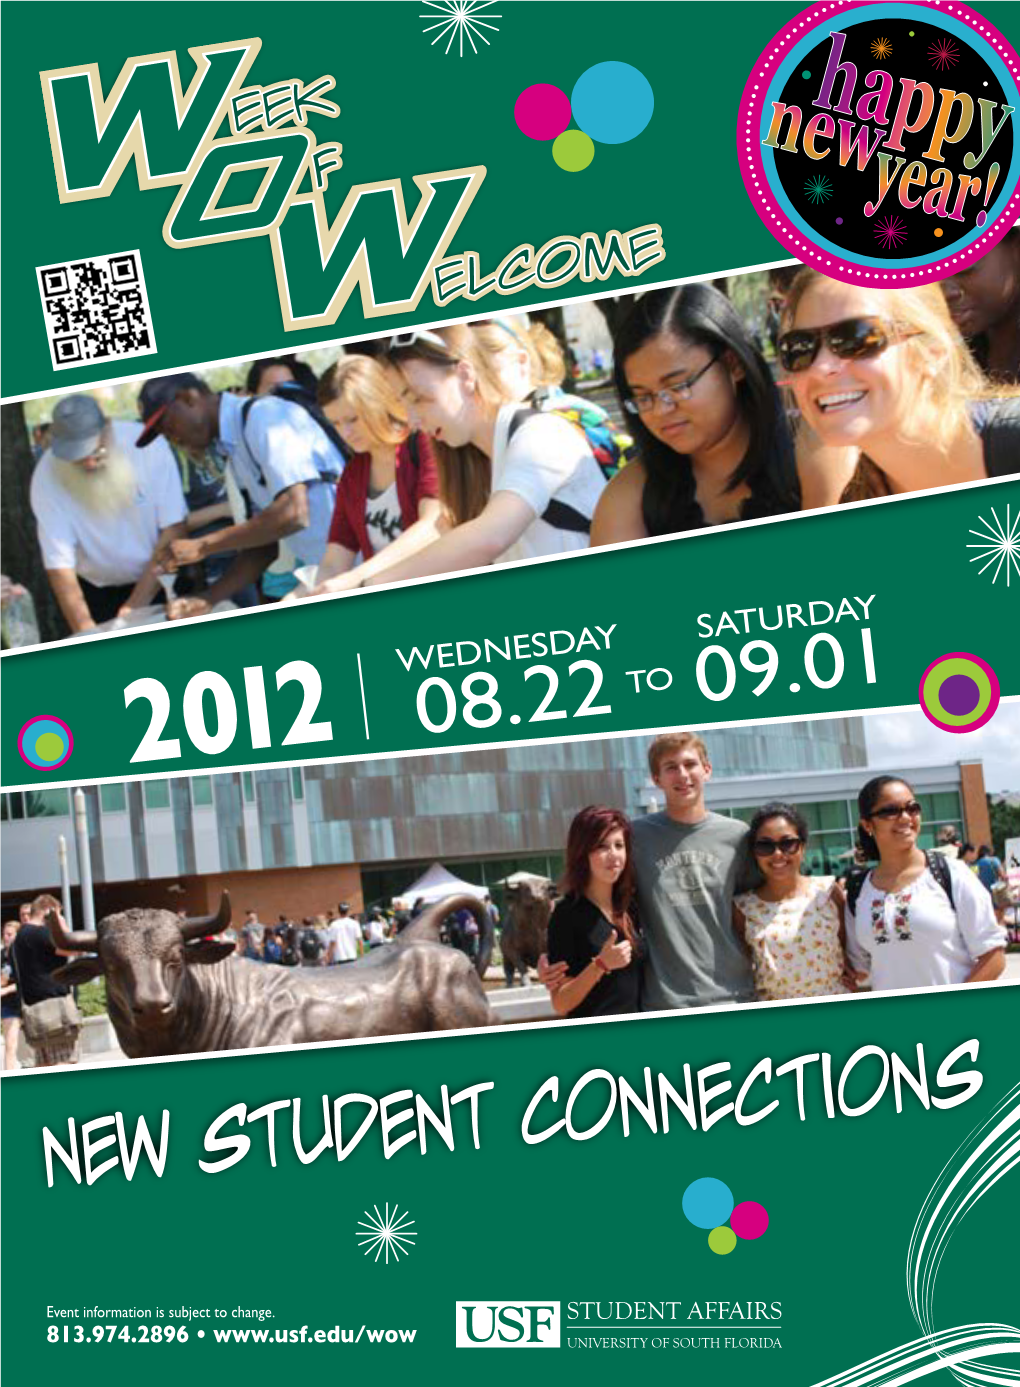 New Student Connections